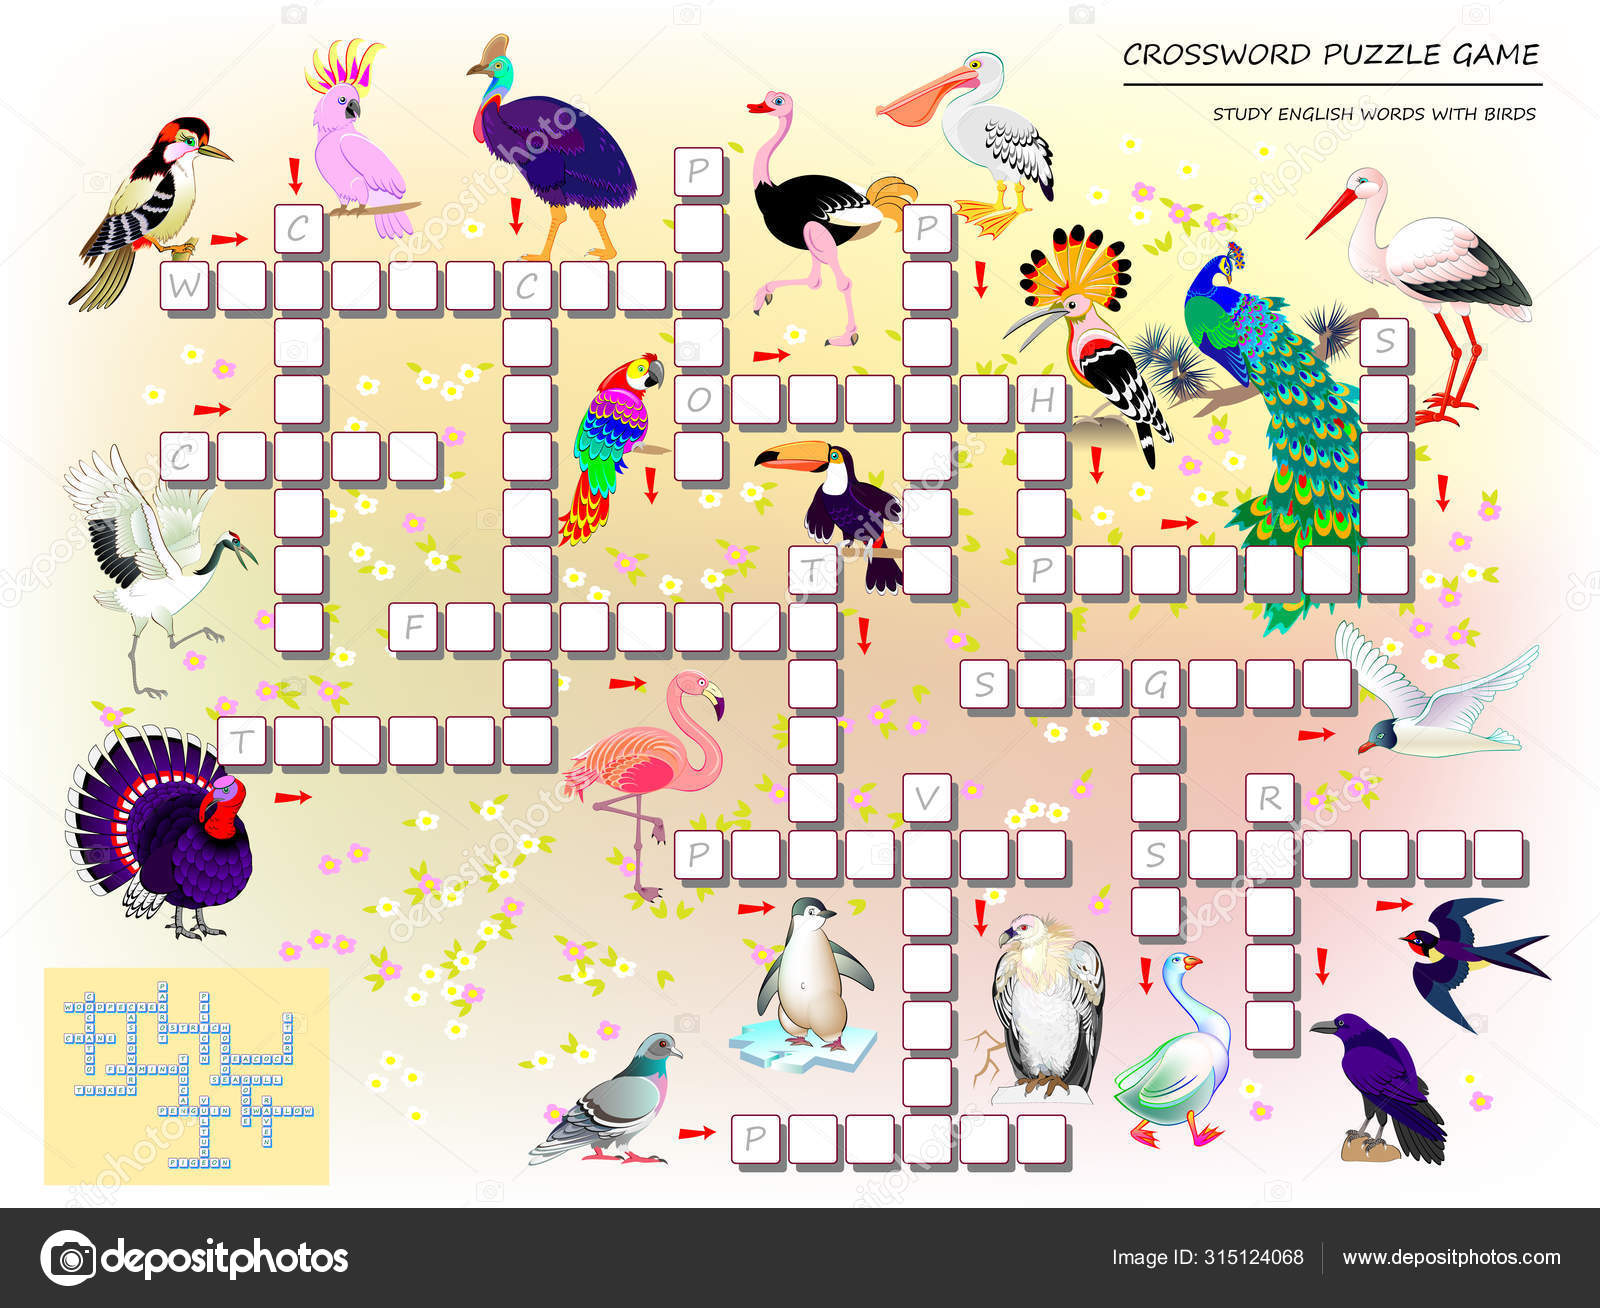 crossword puzzle game kids cute birds educational page children study stock vector image by c nataljacernecka 315124068